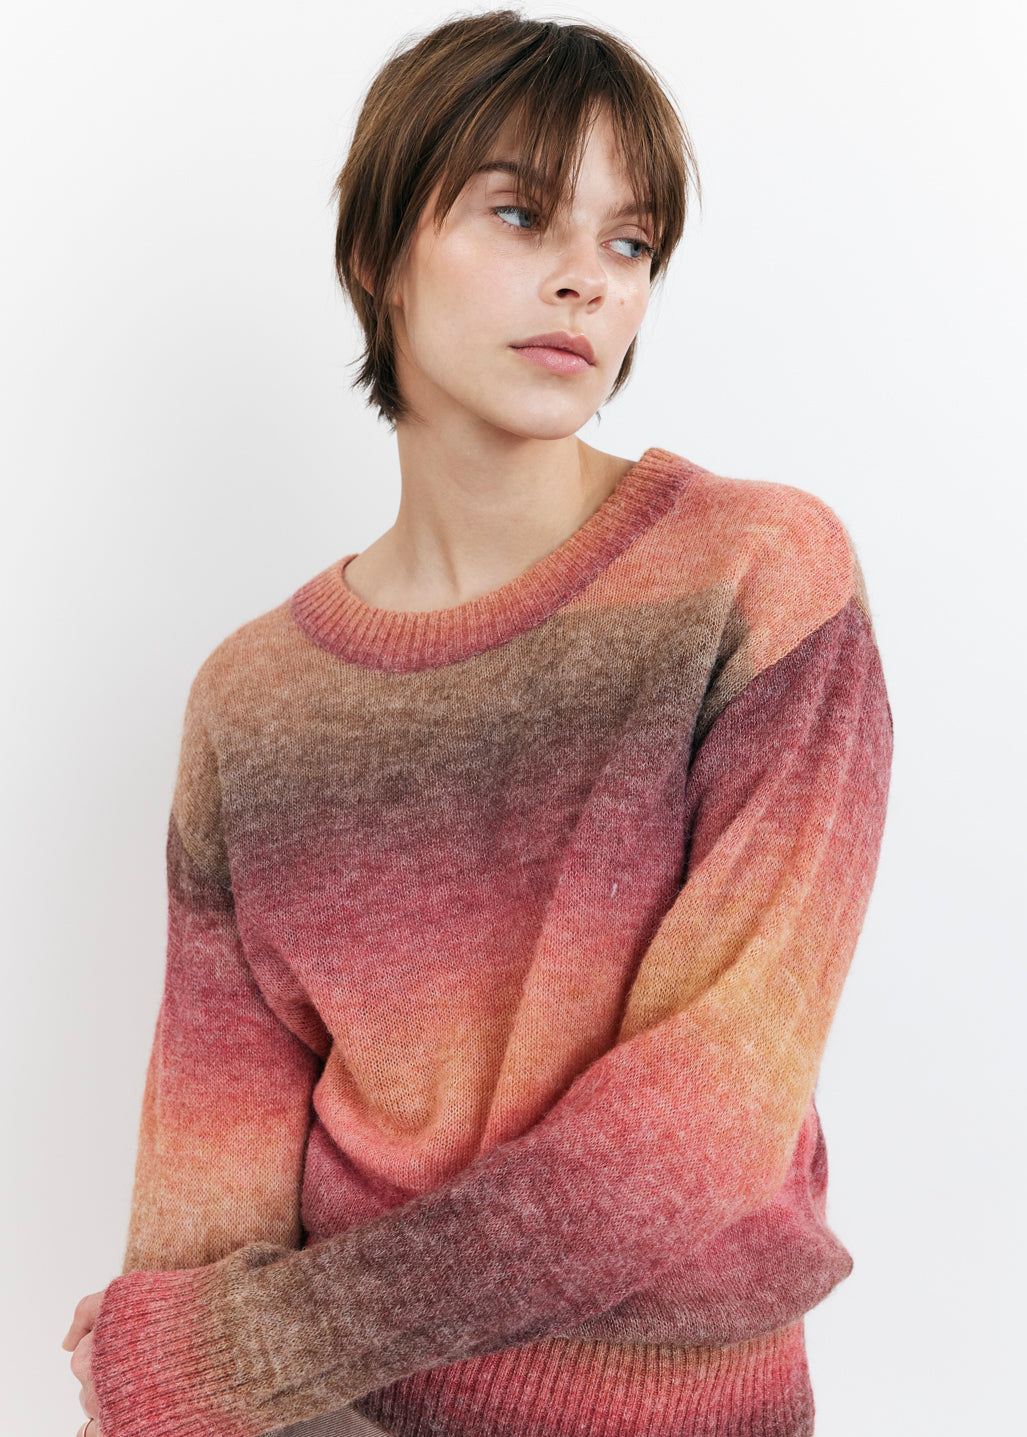 Ombre Melange Pullover  Pullover, Ombre fashion, Cotton candy colors